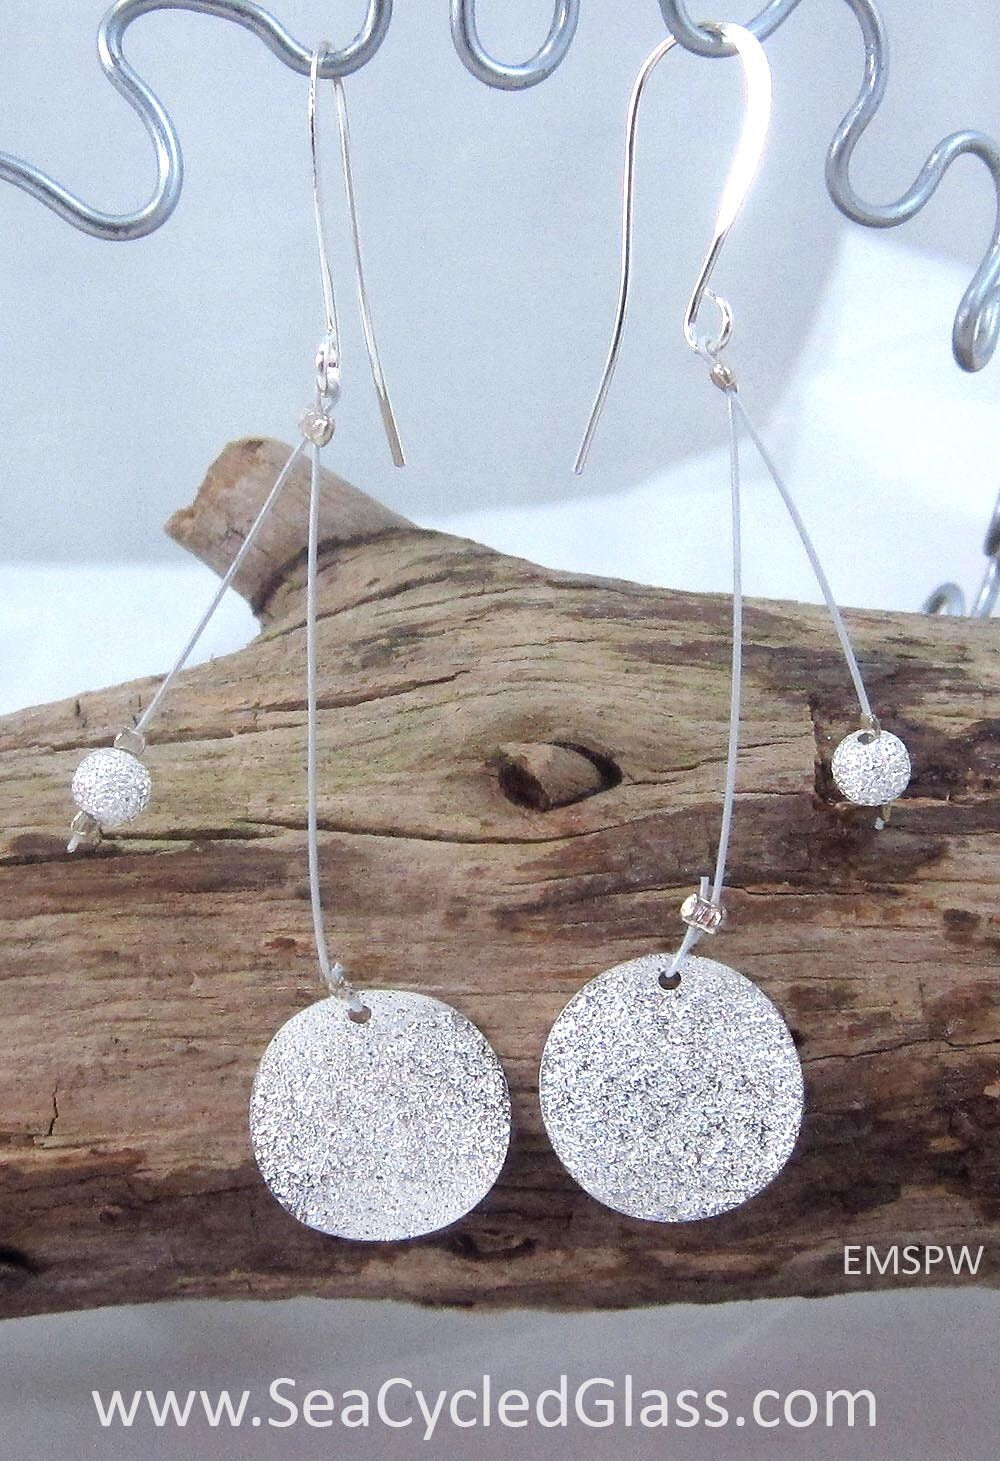 Moonshine earrings - Silverplate stardust disk and bead on filaments with hypoallergenic silverplate earring hooks